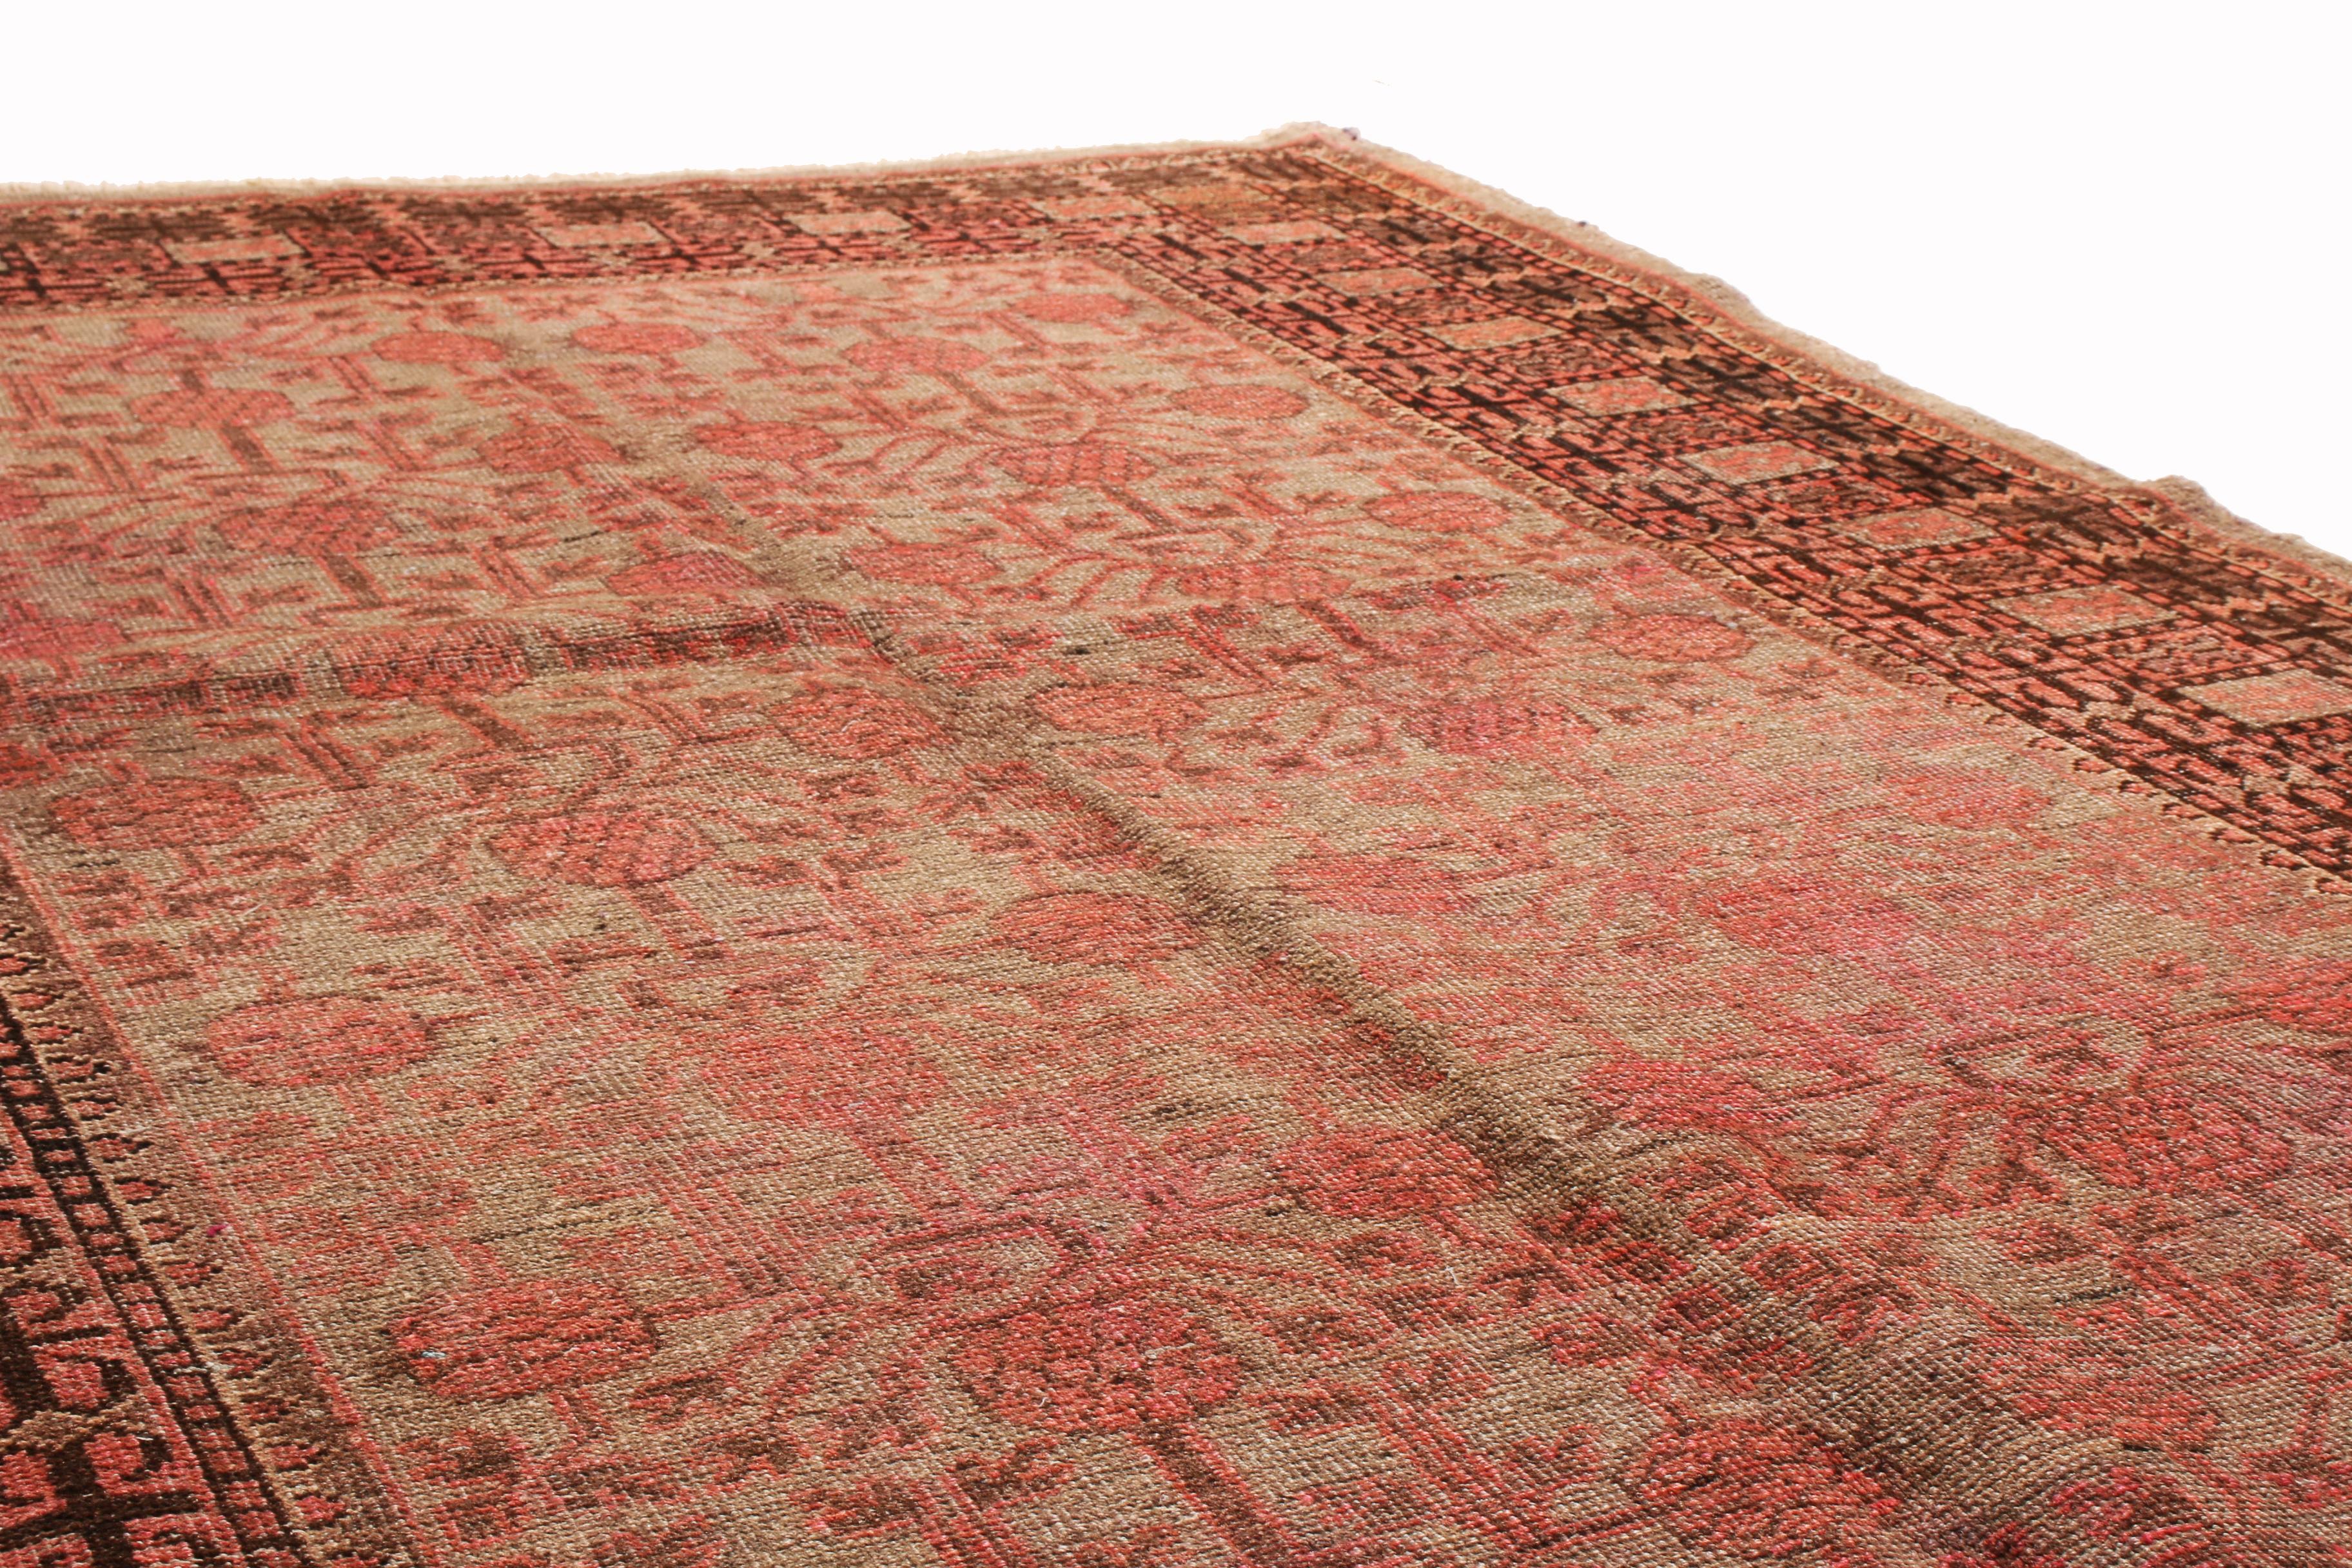 Originating from India, this new traditional Samarkand wool rug employs many features remarkably similar to antique Khotan rugs. Hand knotted in high-quality wool, the all-over field design portrays red and black pomegranates against a blue